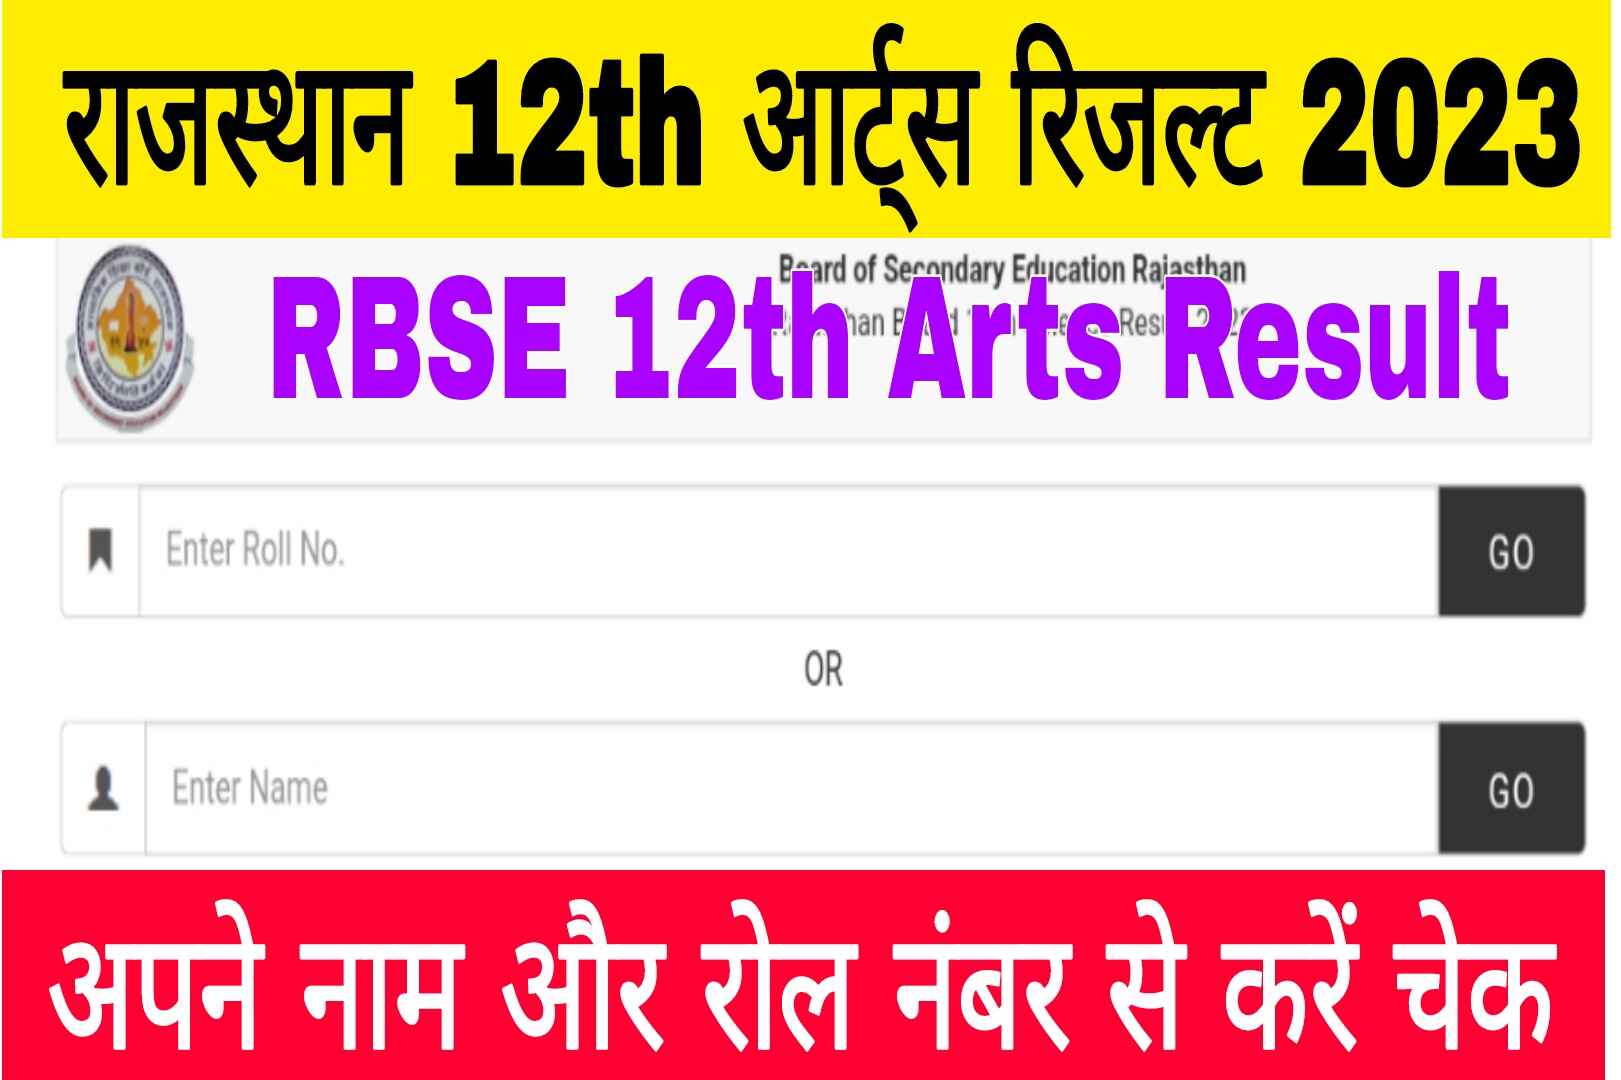 Rajasthan Board 12th Arts Result 2023 Name Wise